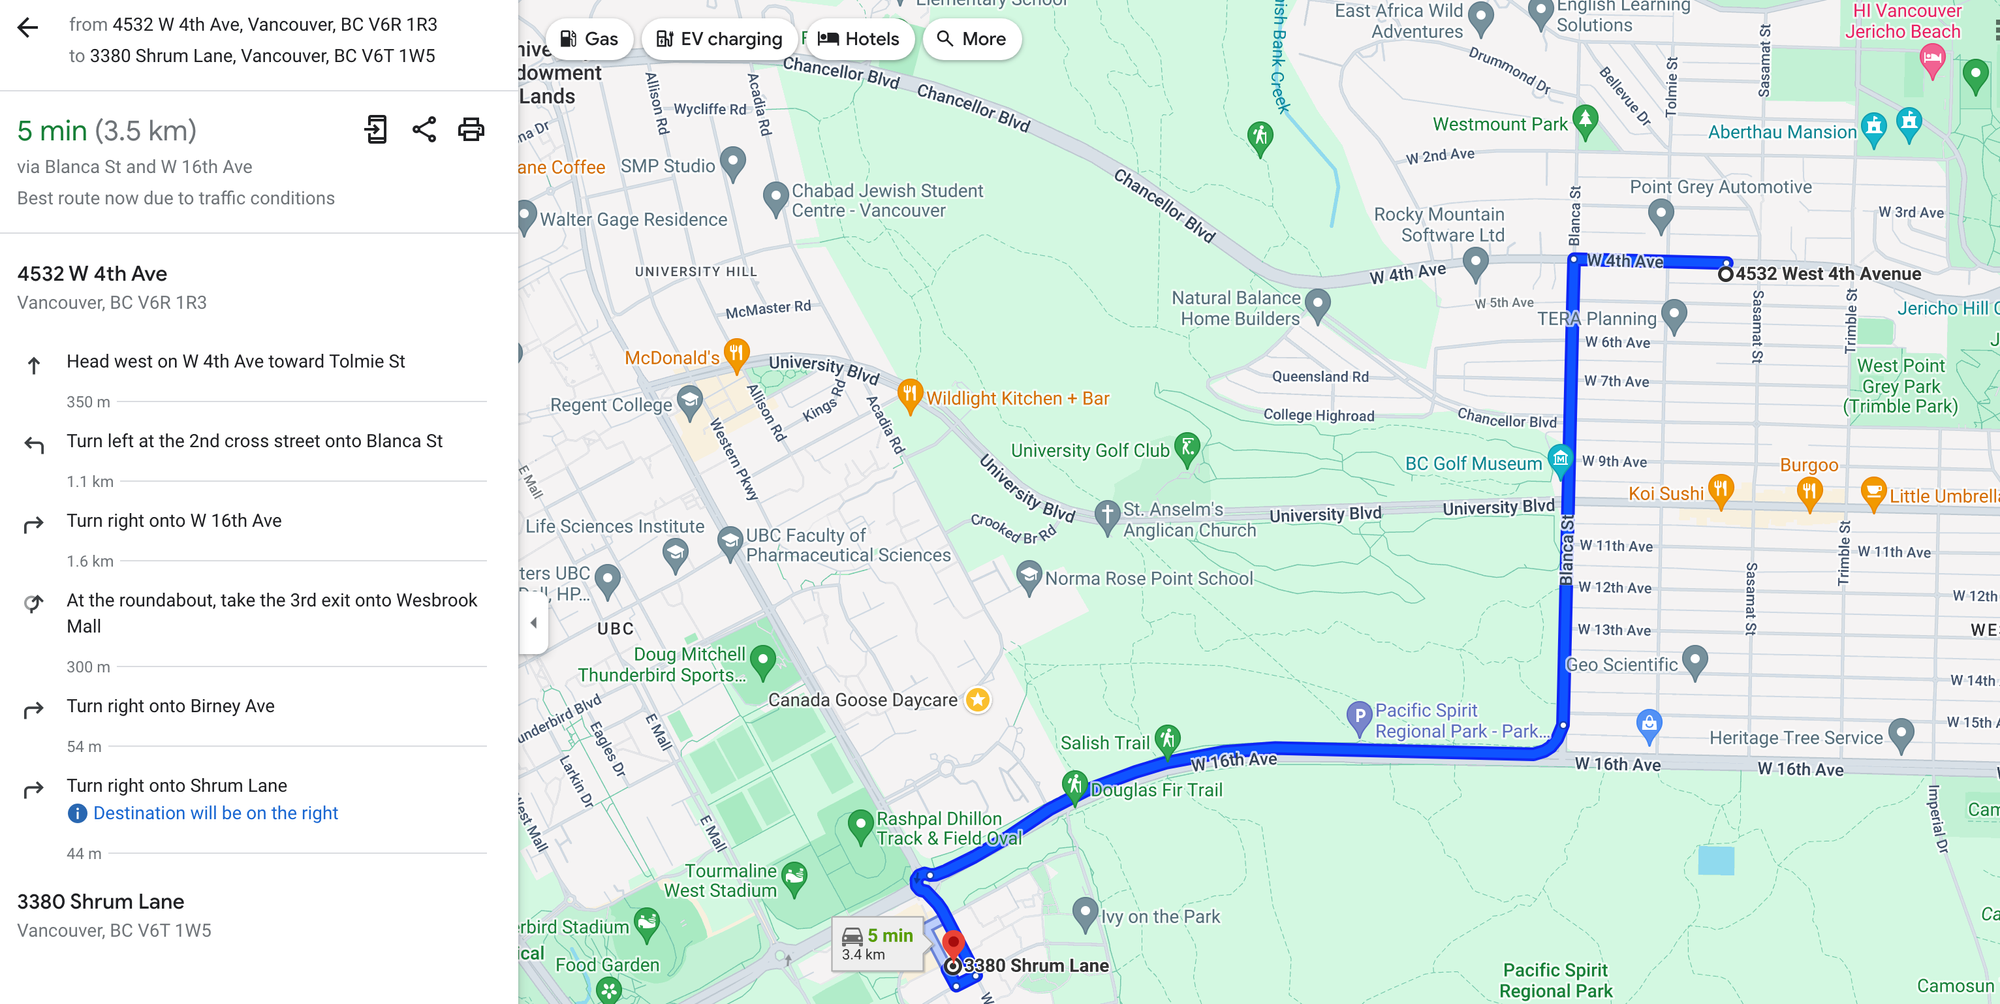 Driving directions from the Google Maps API closely match that from OSRM